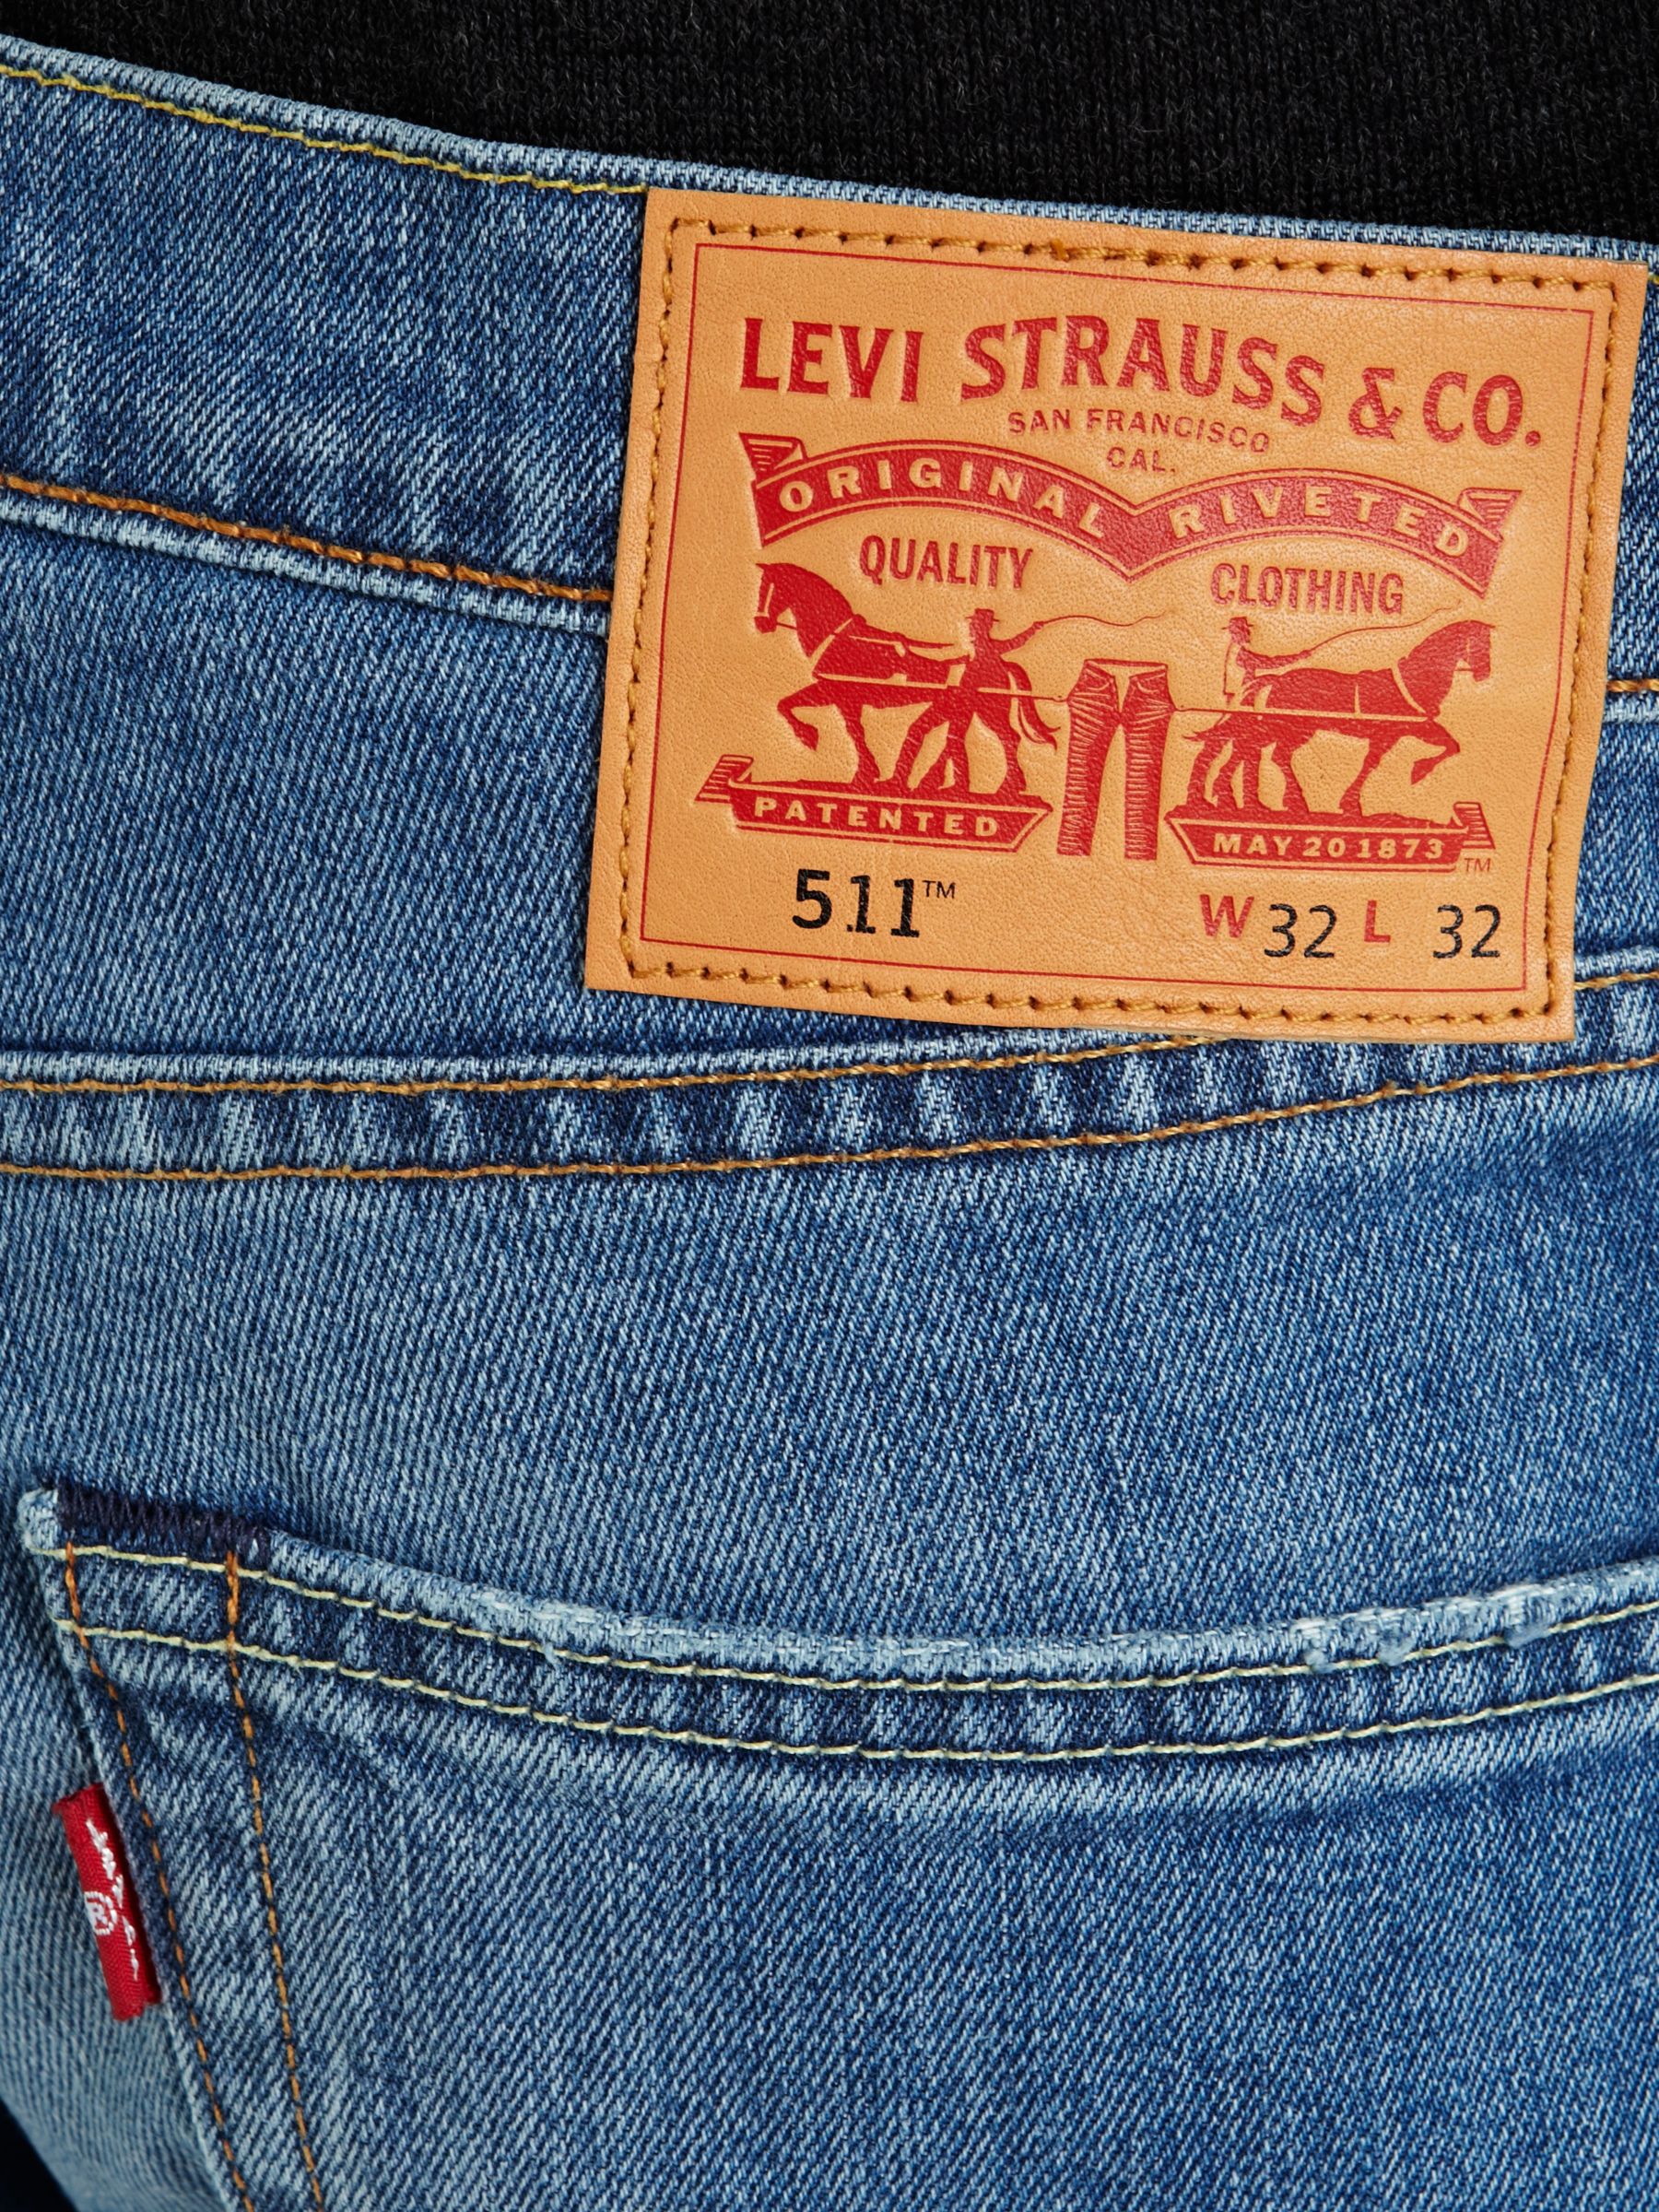 levis patented may 20 1873